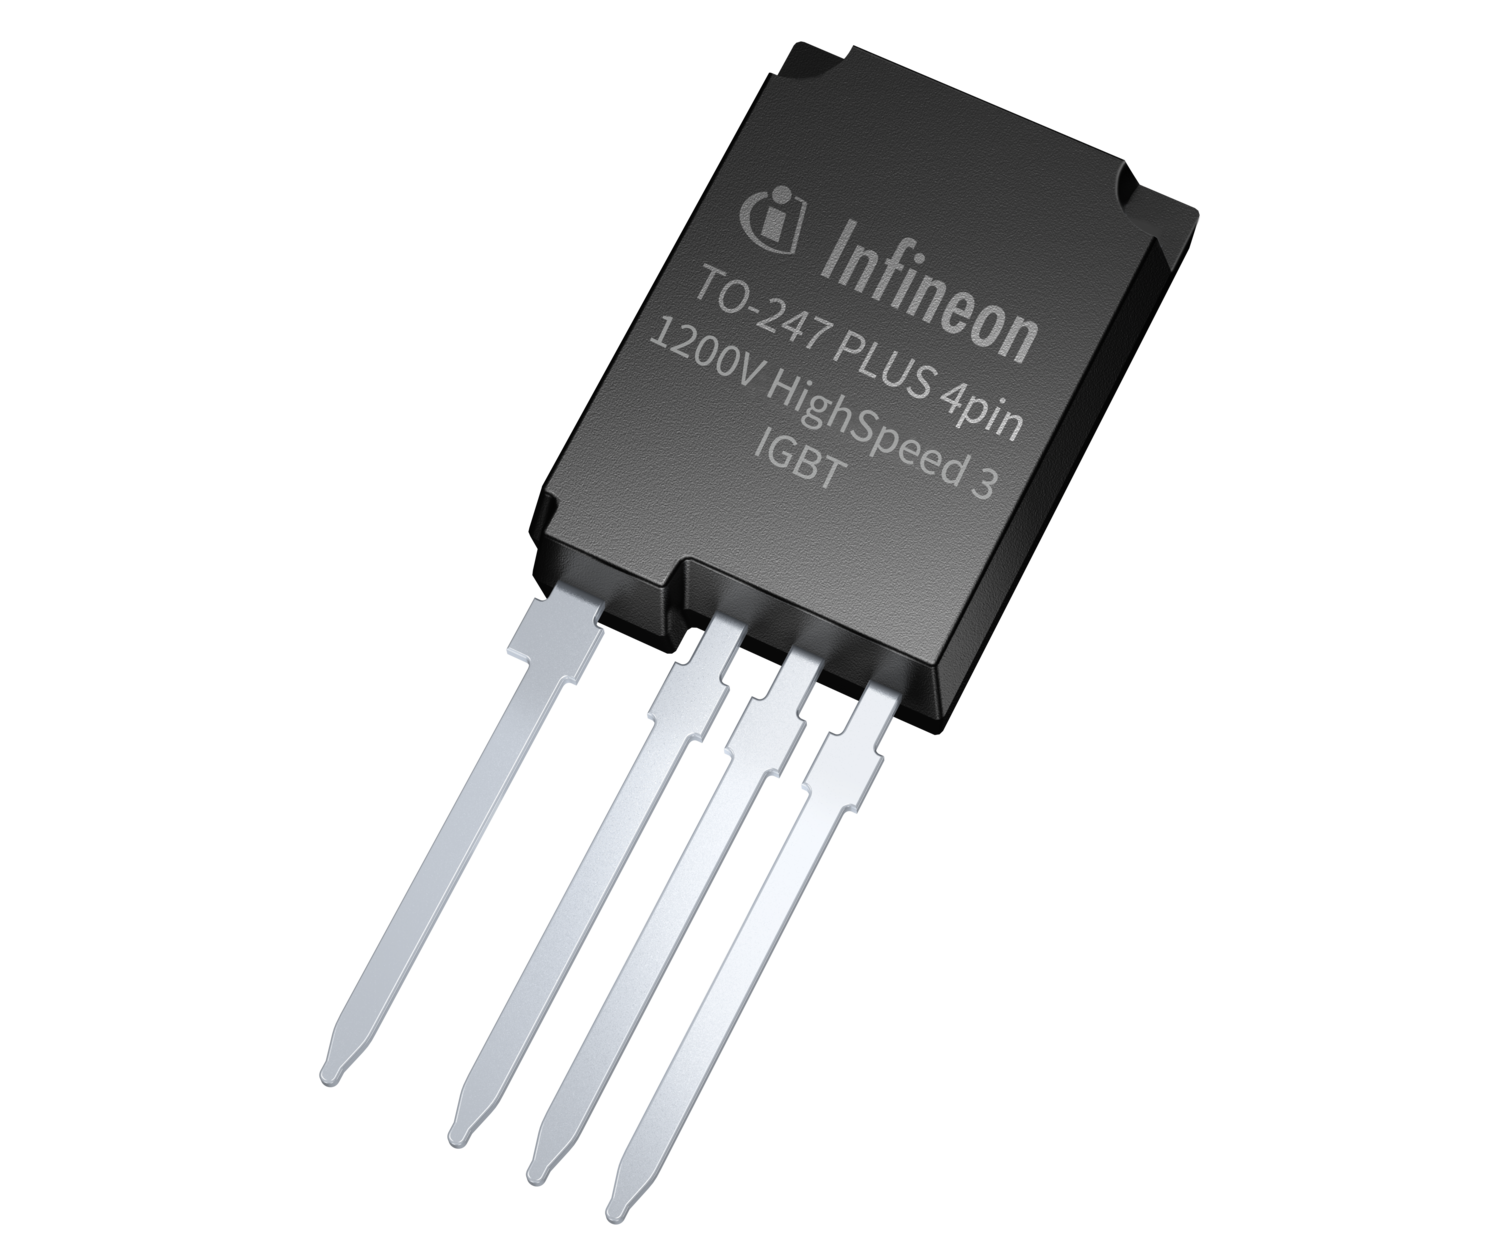 1200 V Discrete IGBT Product Portfolio Comes in TO-247PLUS Package